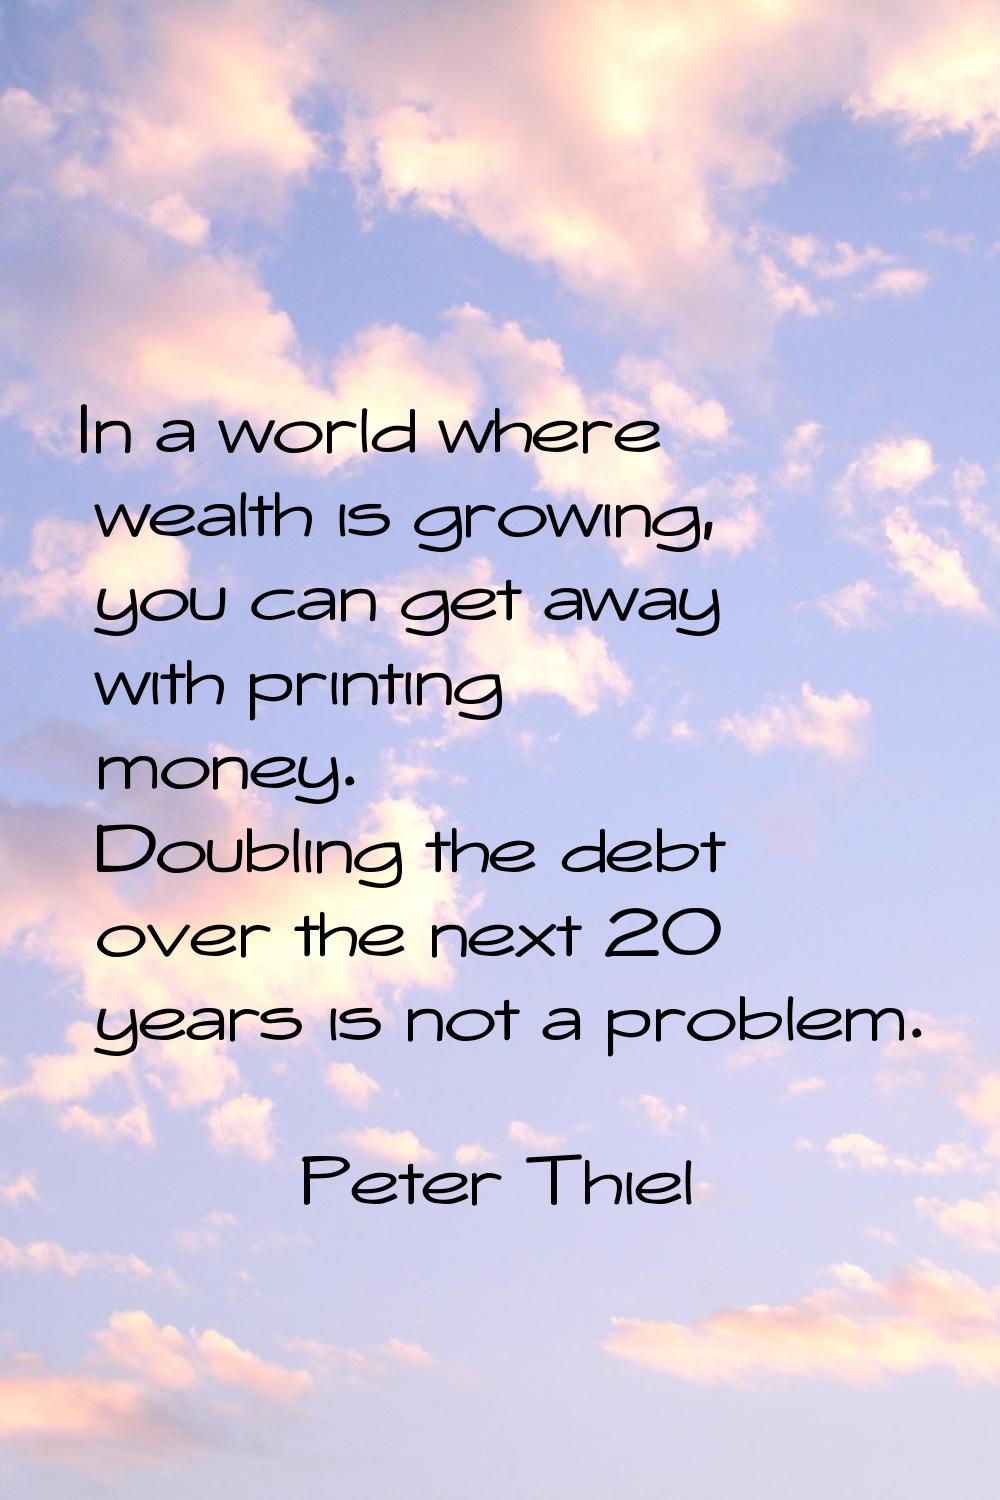 In a world where wealth is growing, you can get away with printing money. Doubling the debt over th